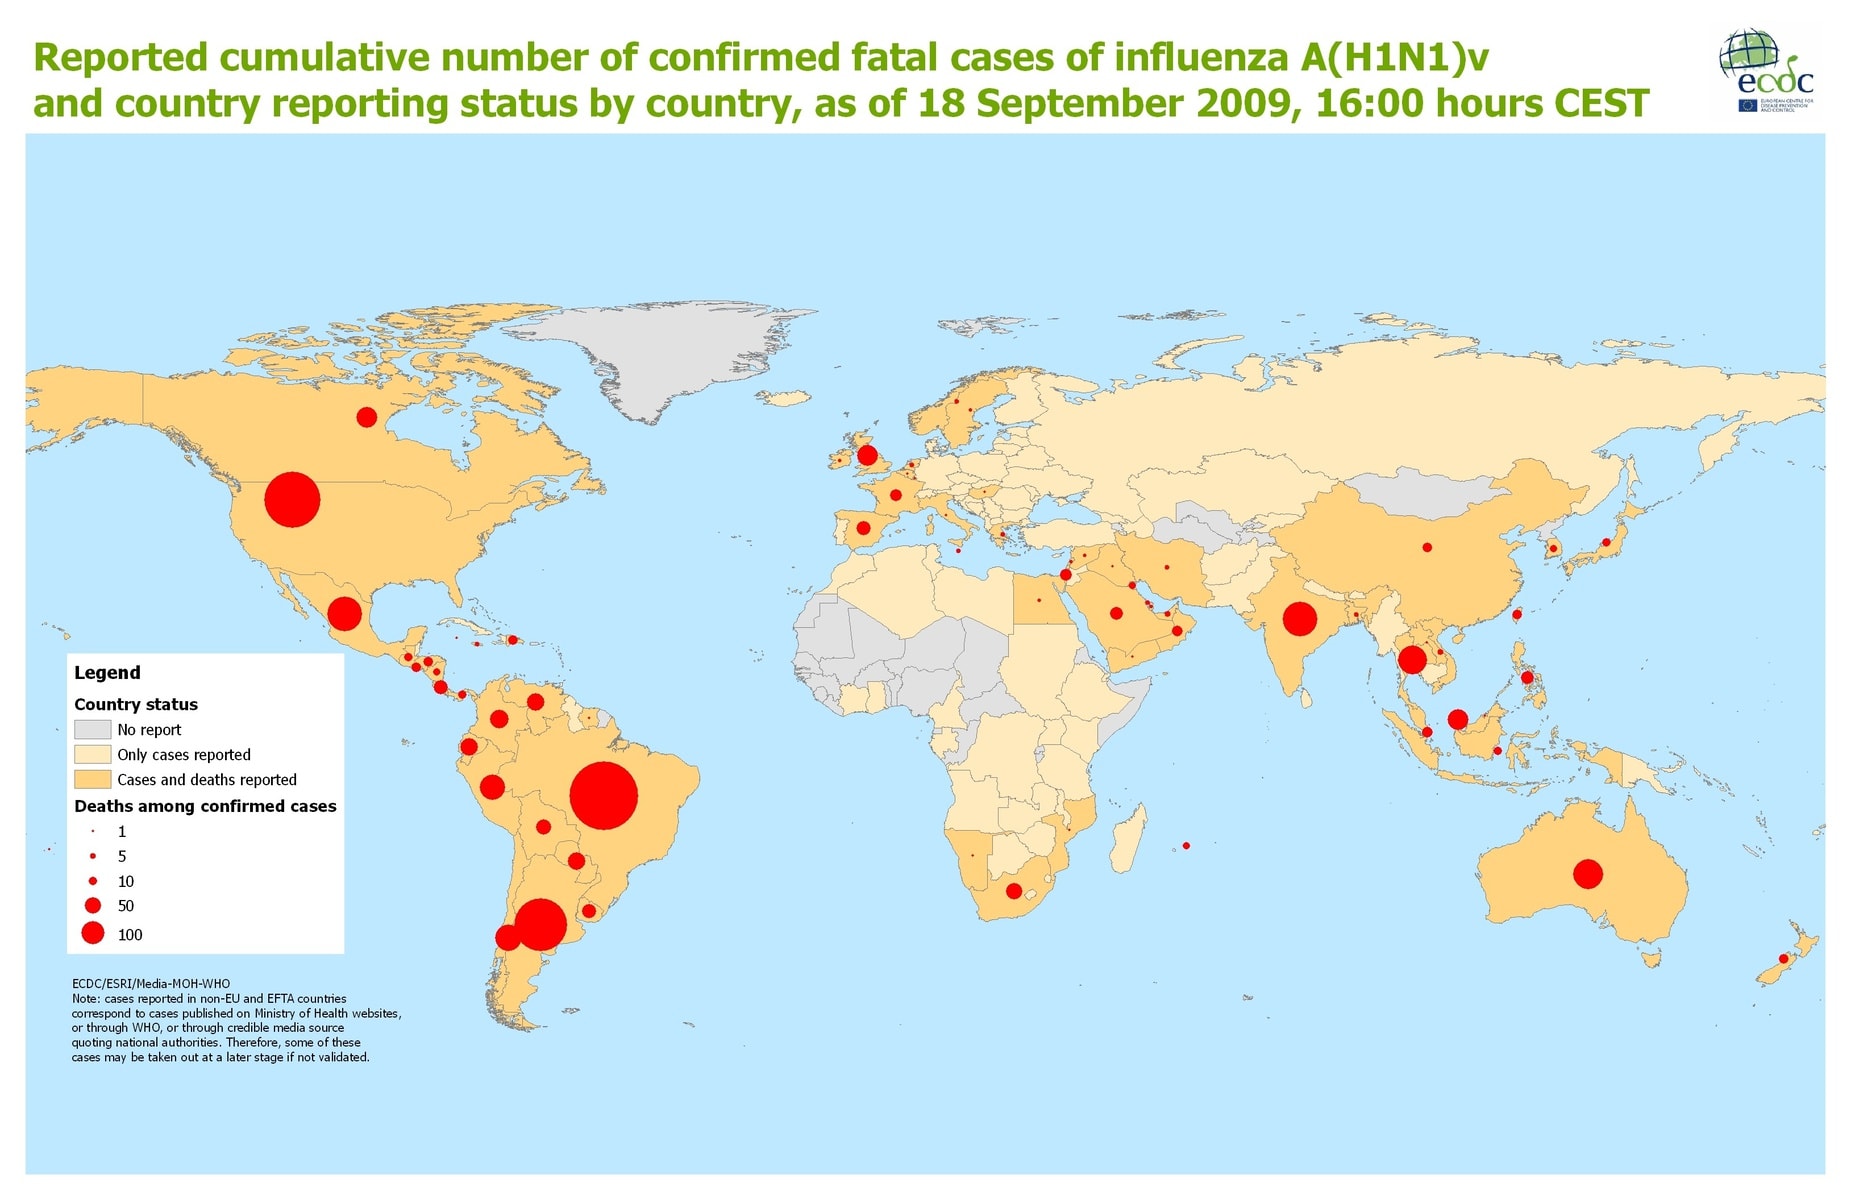 Reported Cumulative Number Of Confirmed Fatal Cases Of Influenza A(H1N1)V And Country Reporting Status By Country.